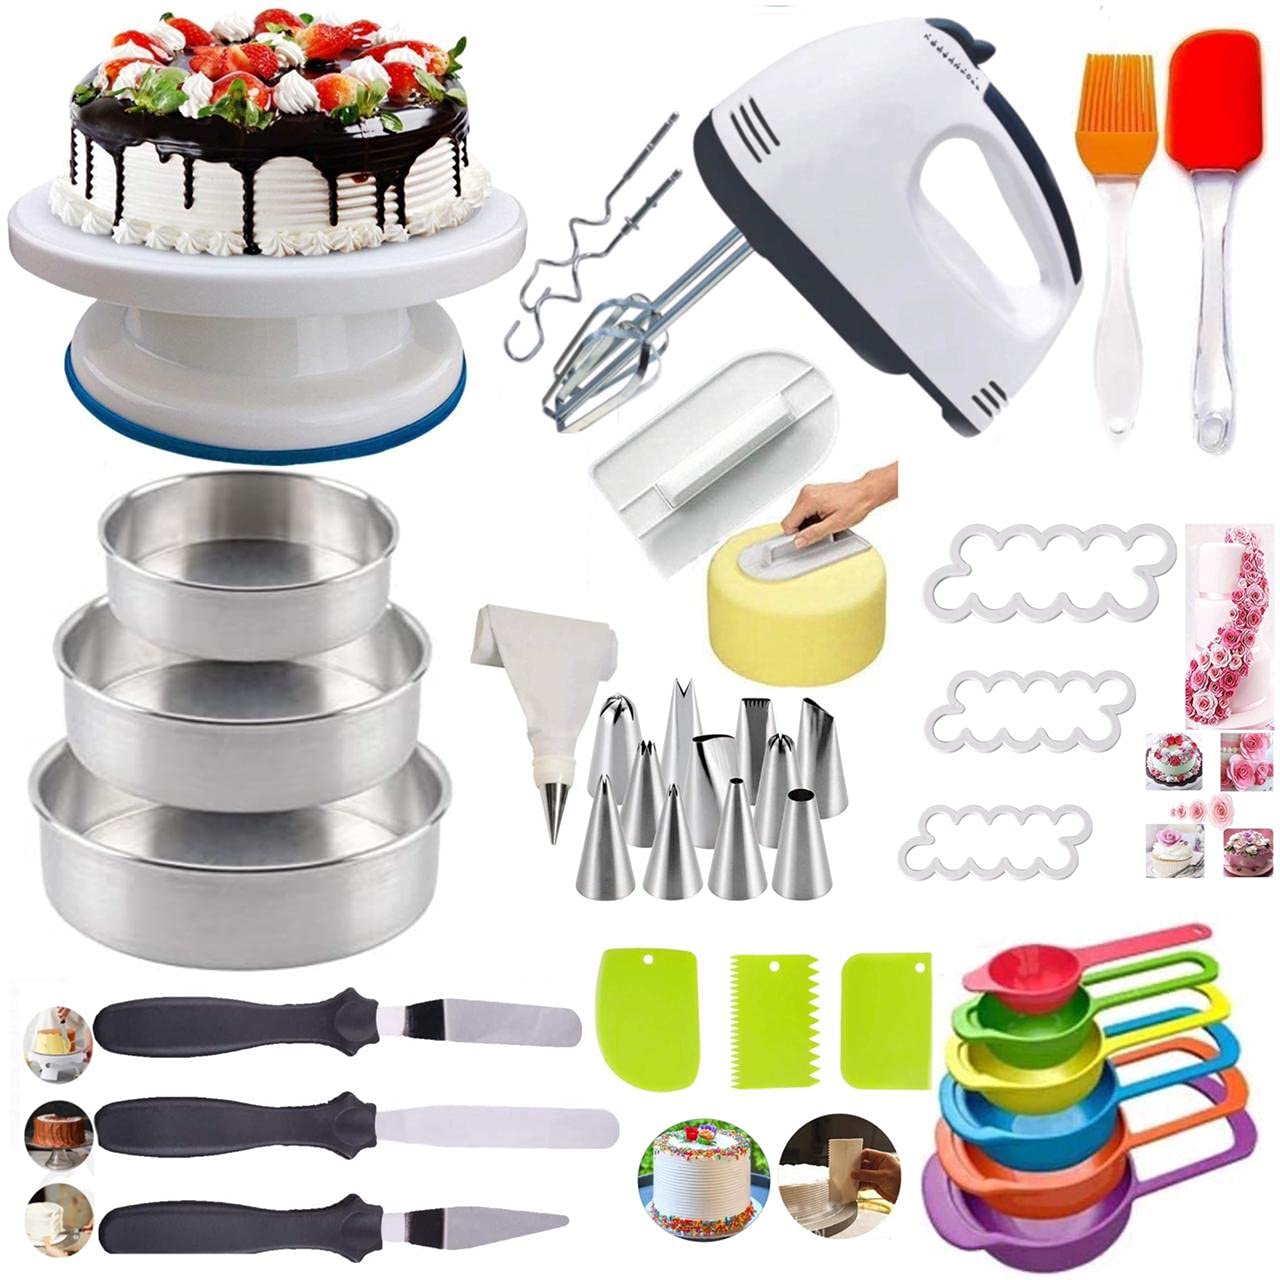 10 best cake decorating tools for beginners and make great cake !-sgquangbinhtourist.com.vn